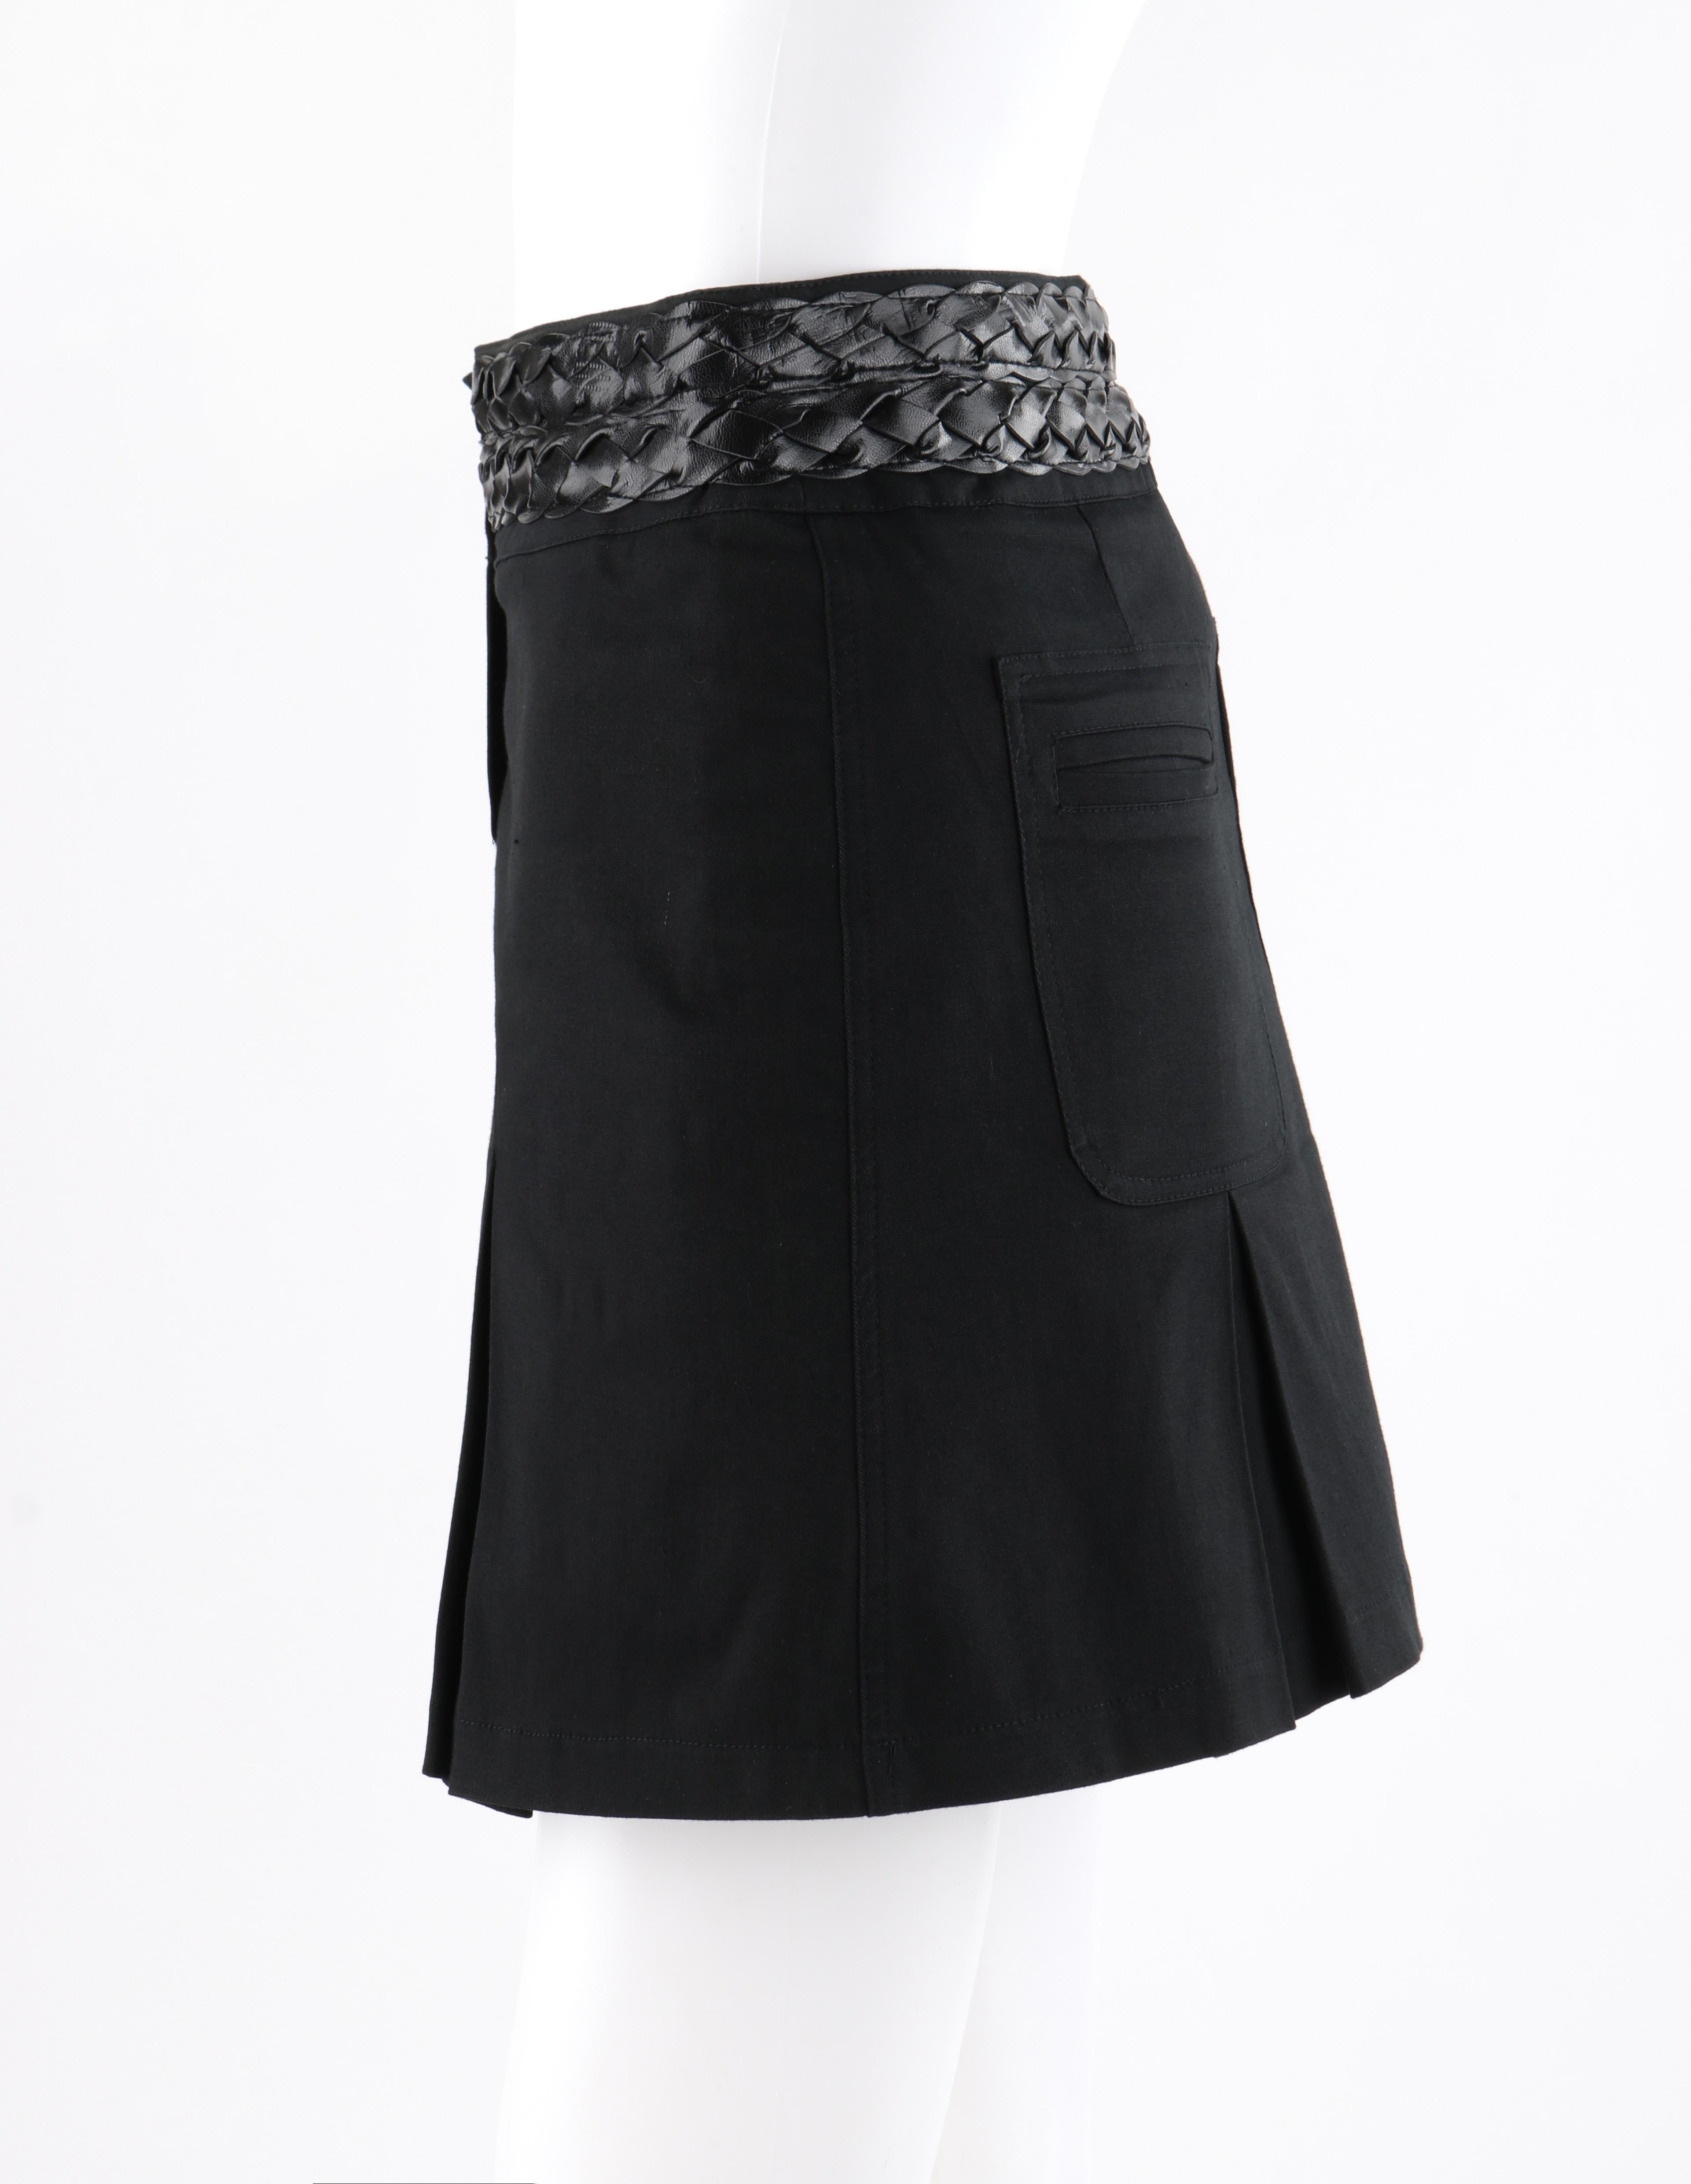 ALEXANDER McQUEEN A/W 1996 “Dante” Black Leather Braid Trim Pleated Mini Skirt In Good Condition For Sale In Thiensville, WI